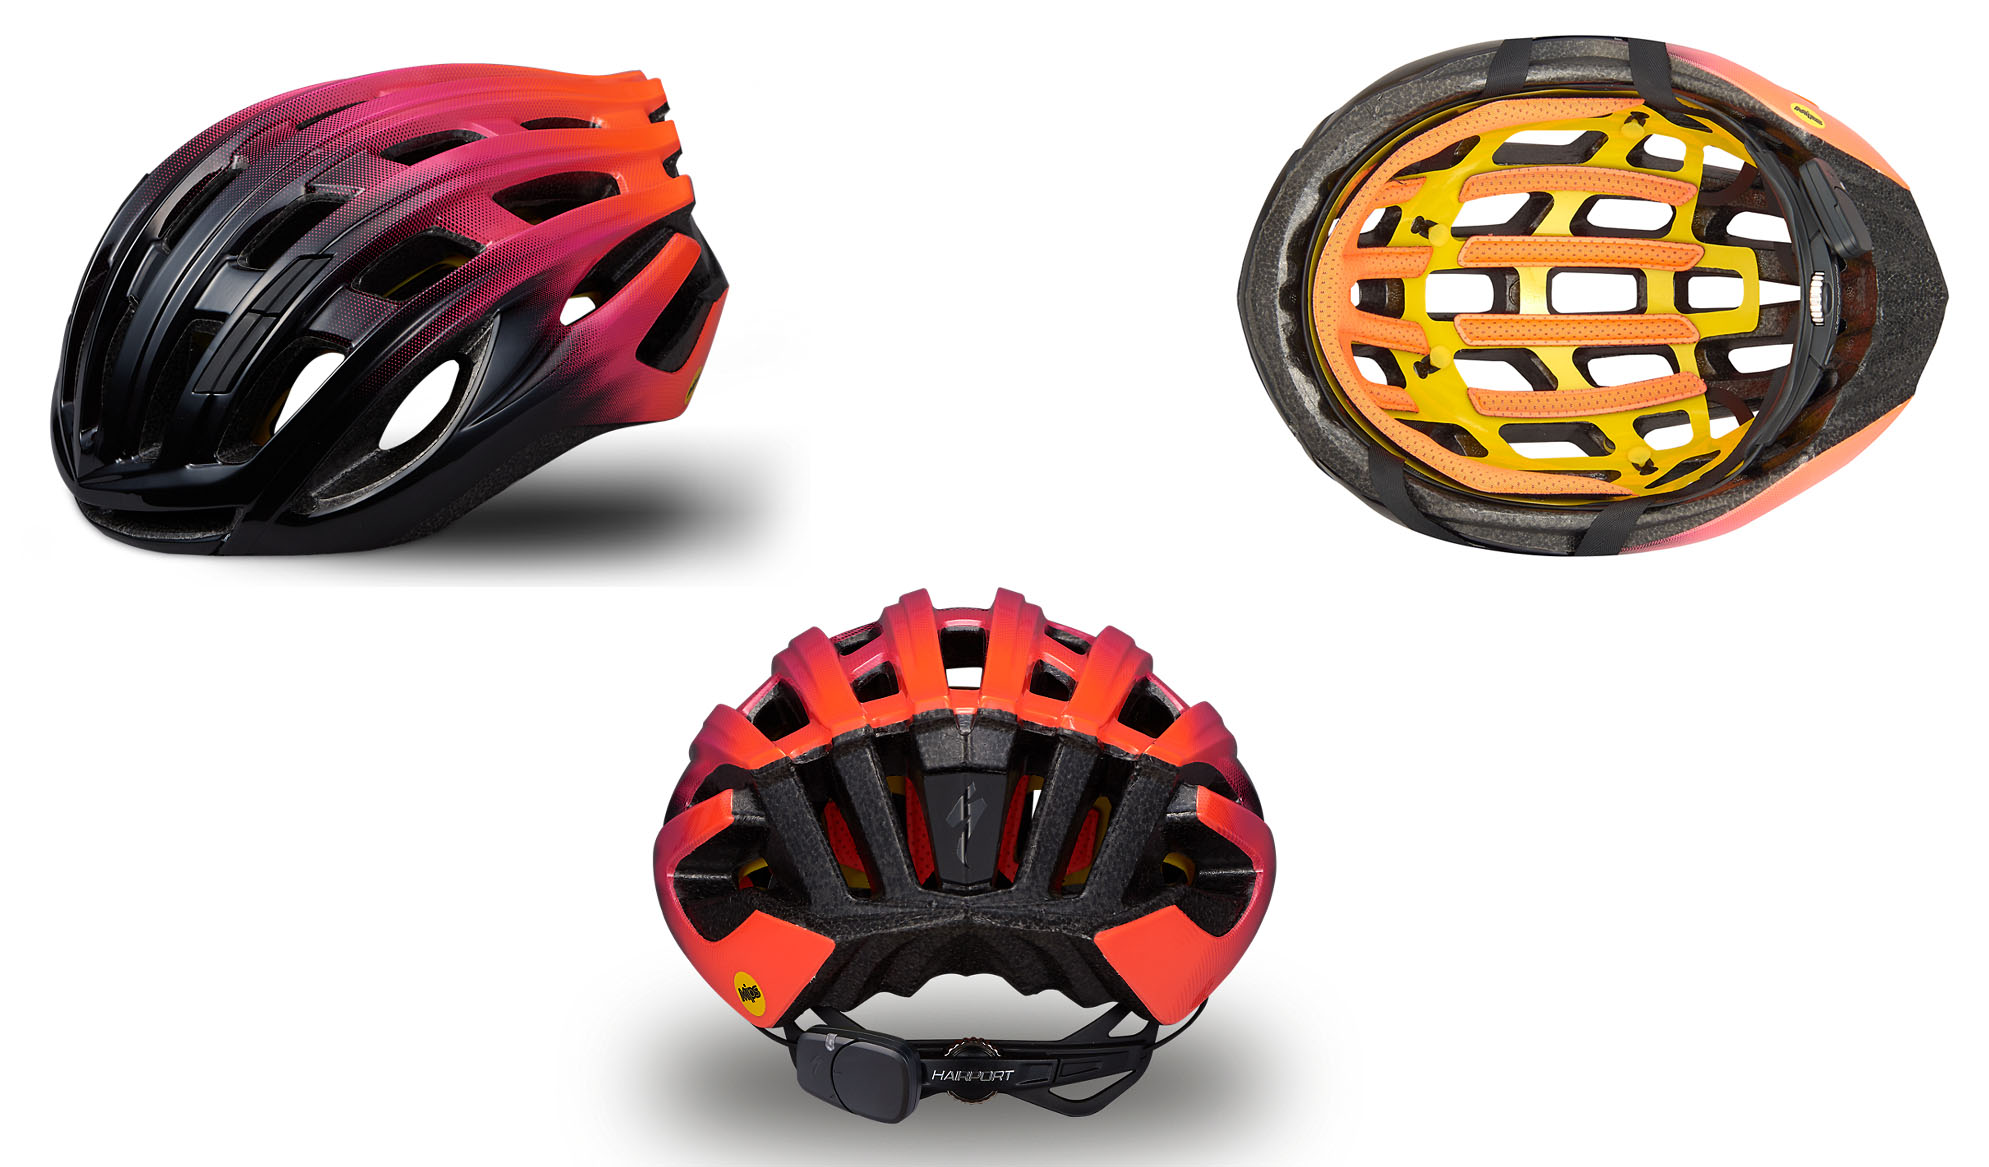 Specialized helmets get safer with ANGi Smart Sensor, MIPS & proprietary MIPS SL